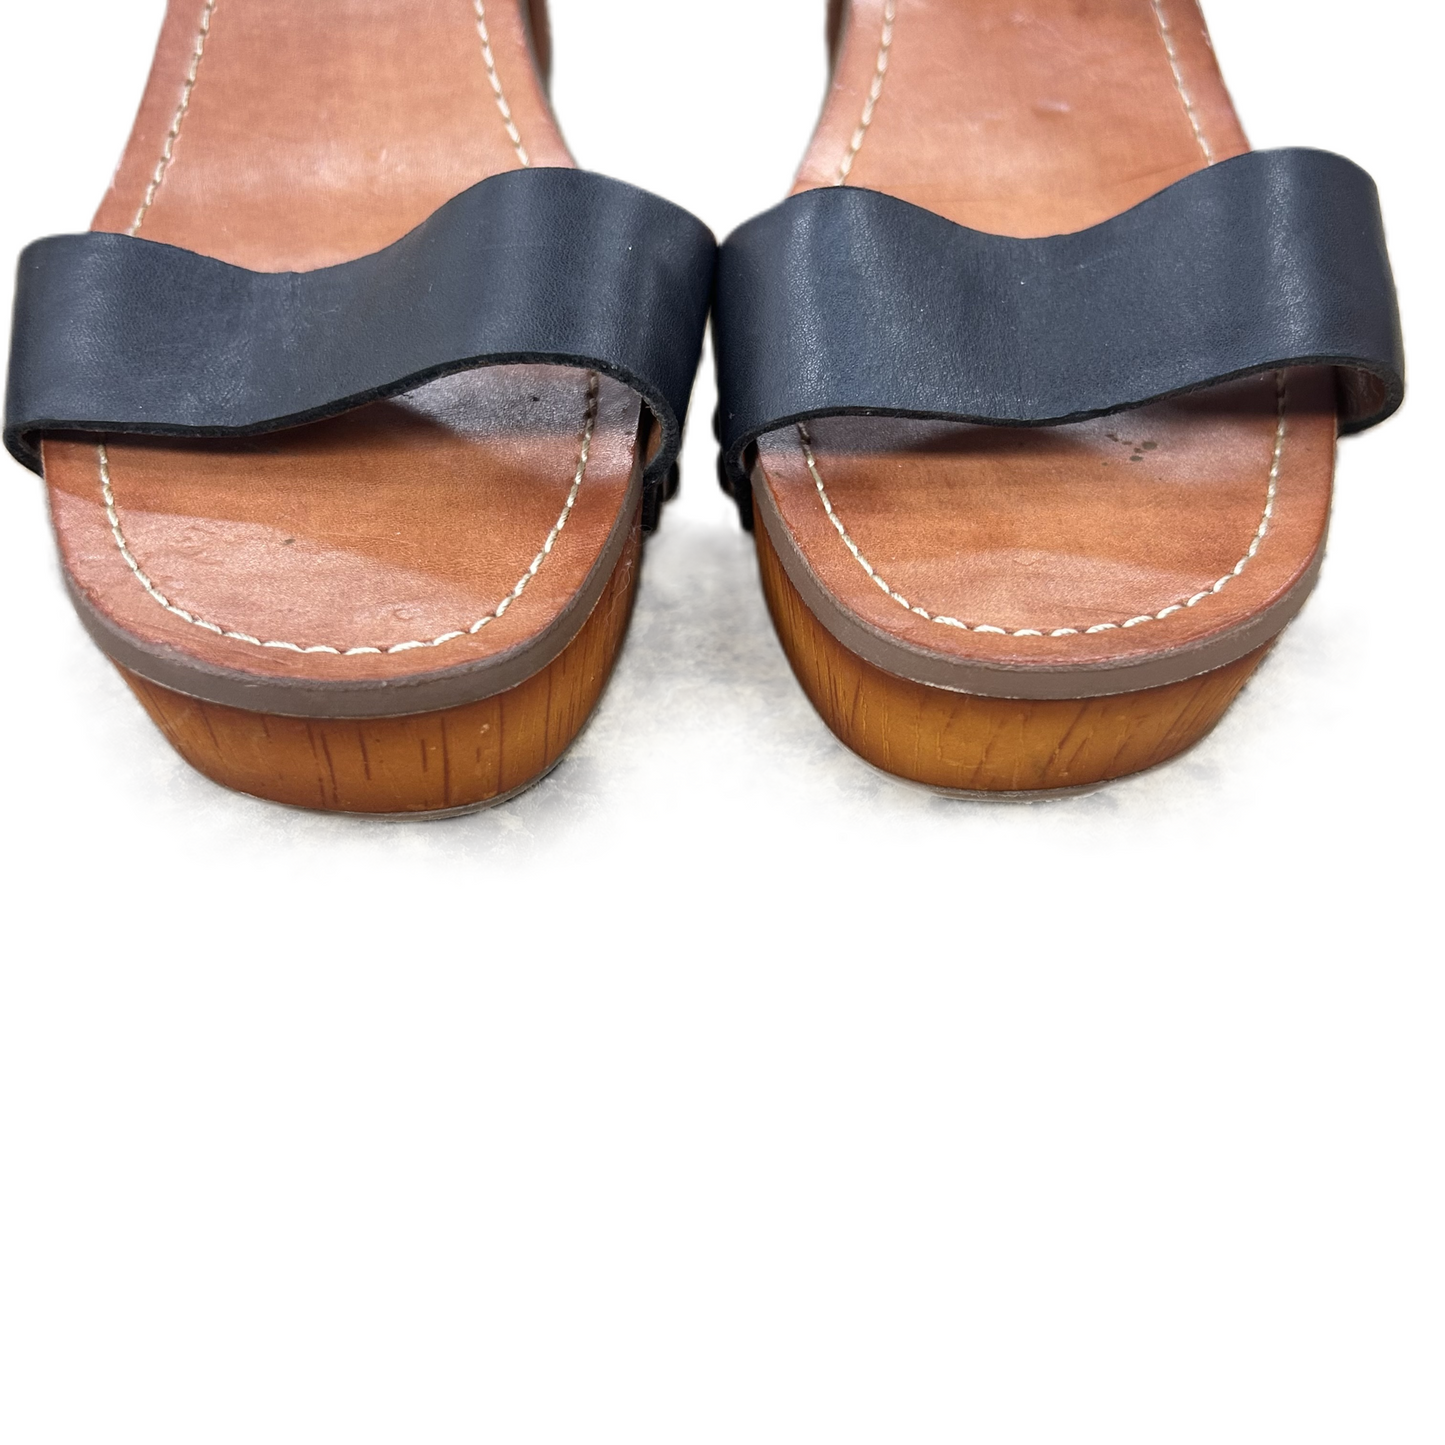 Black Sandals Heels Block By Lucky Brand, Size: 8.5